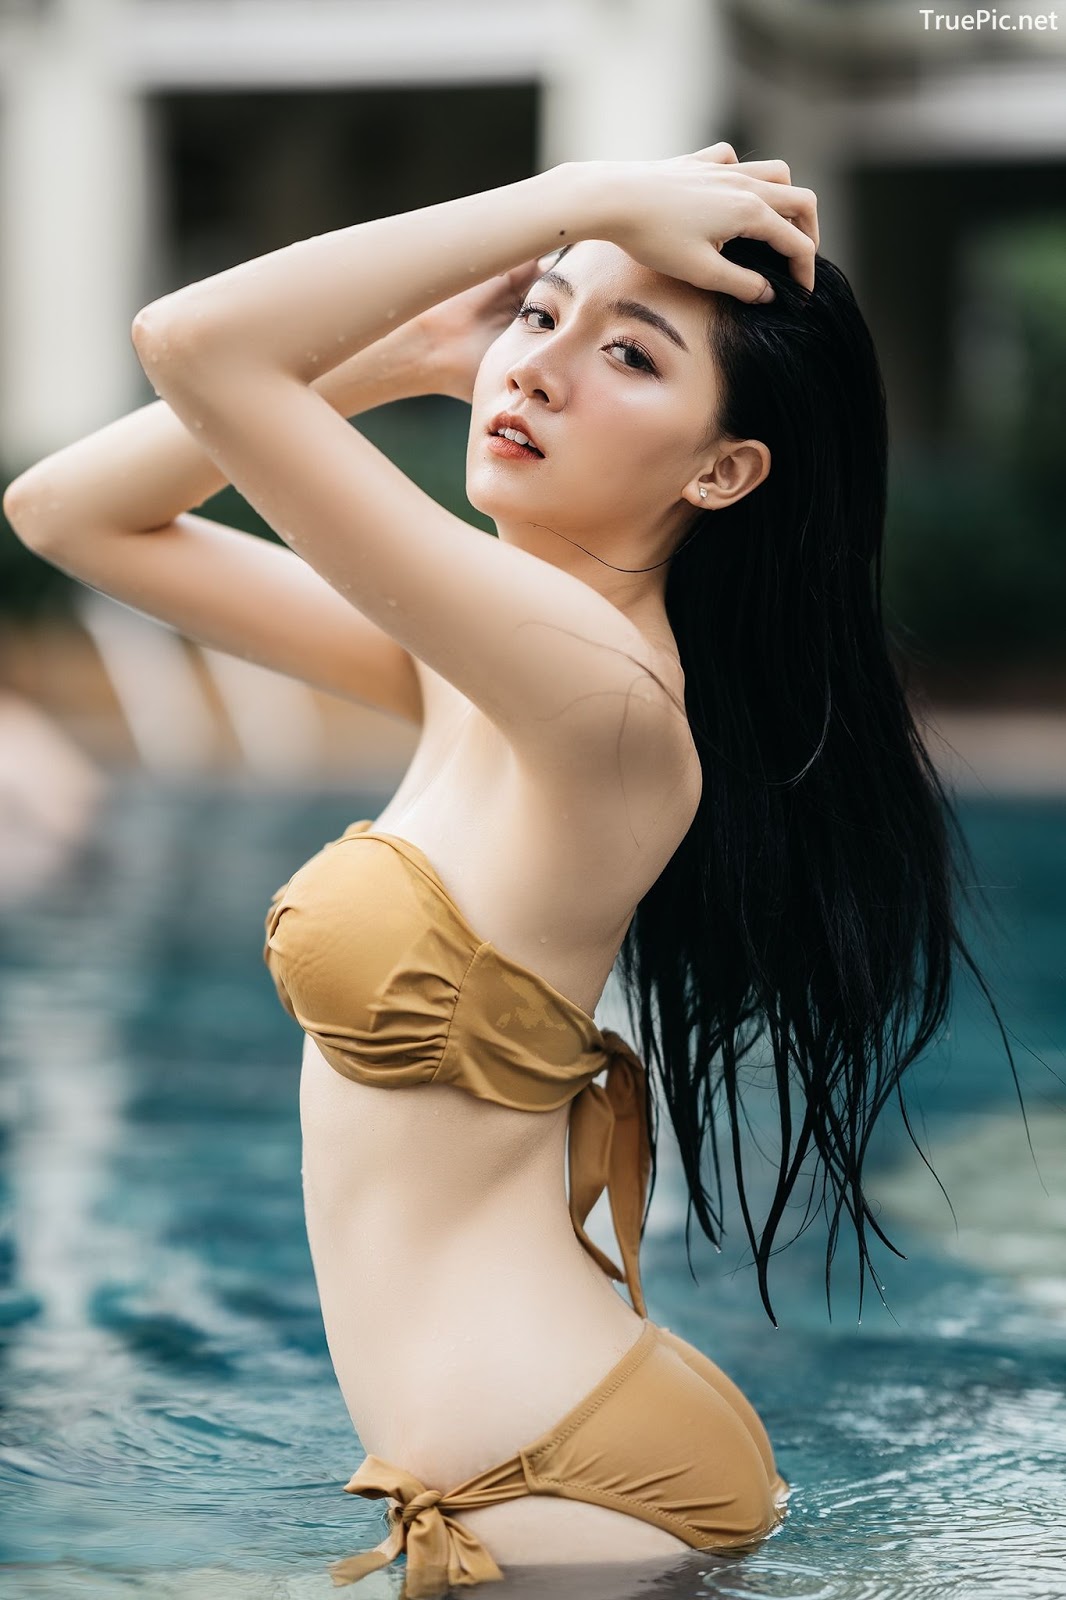 Image Thailand Model - Sasi Ngiunwan - Let’s Summer Chilling - TruePic.net - Picture-24